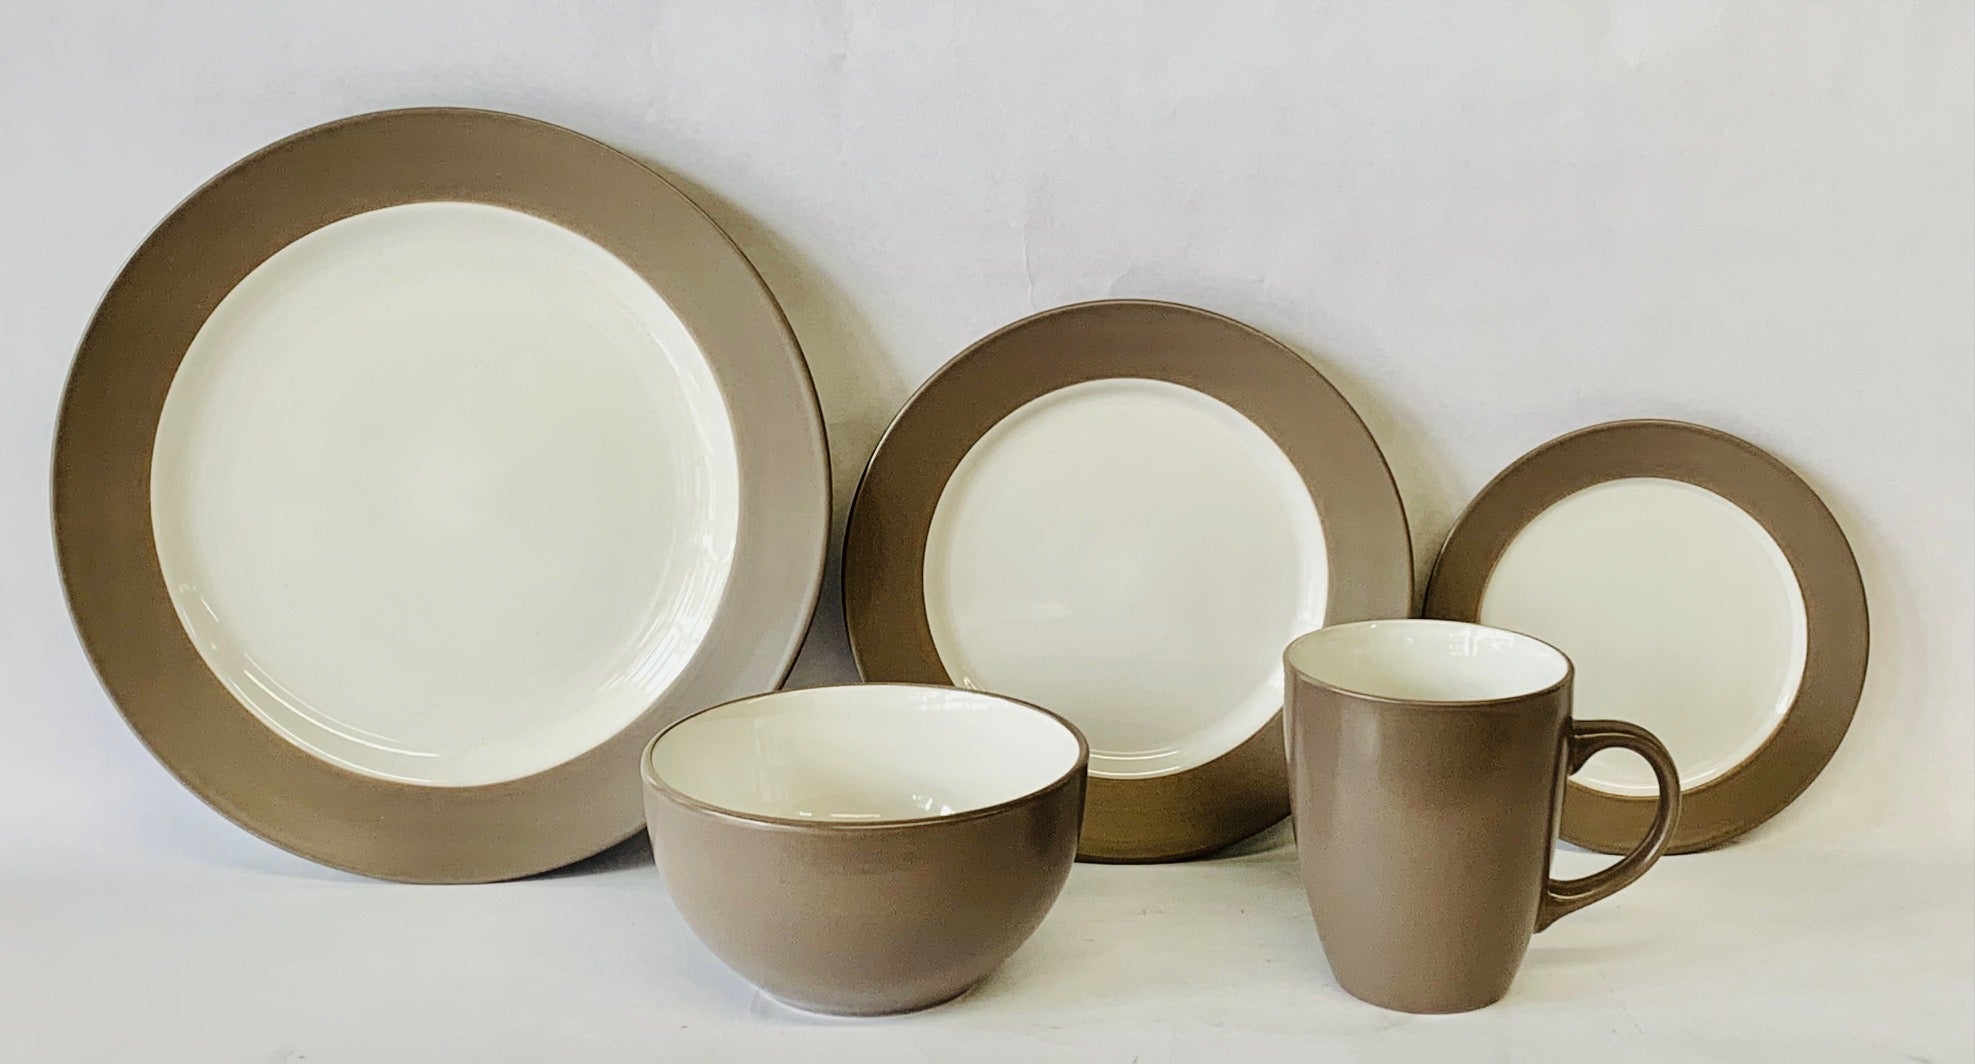 Mikasa Dinnerware 5-piece place setting - Concord Taupe collection - Royal Gift